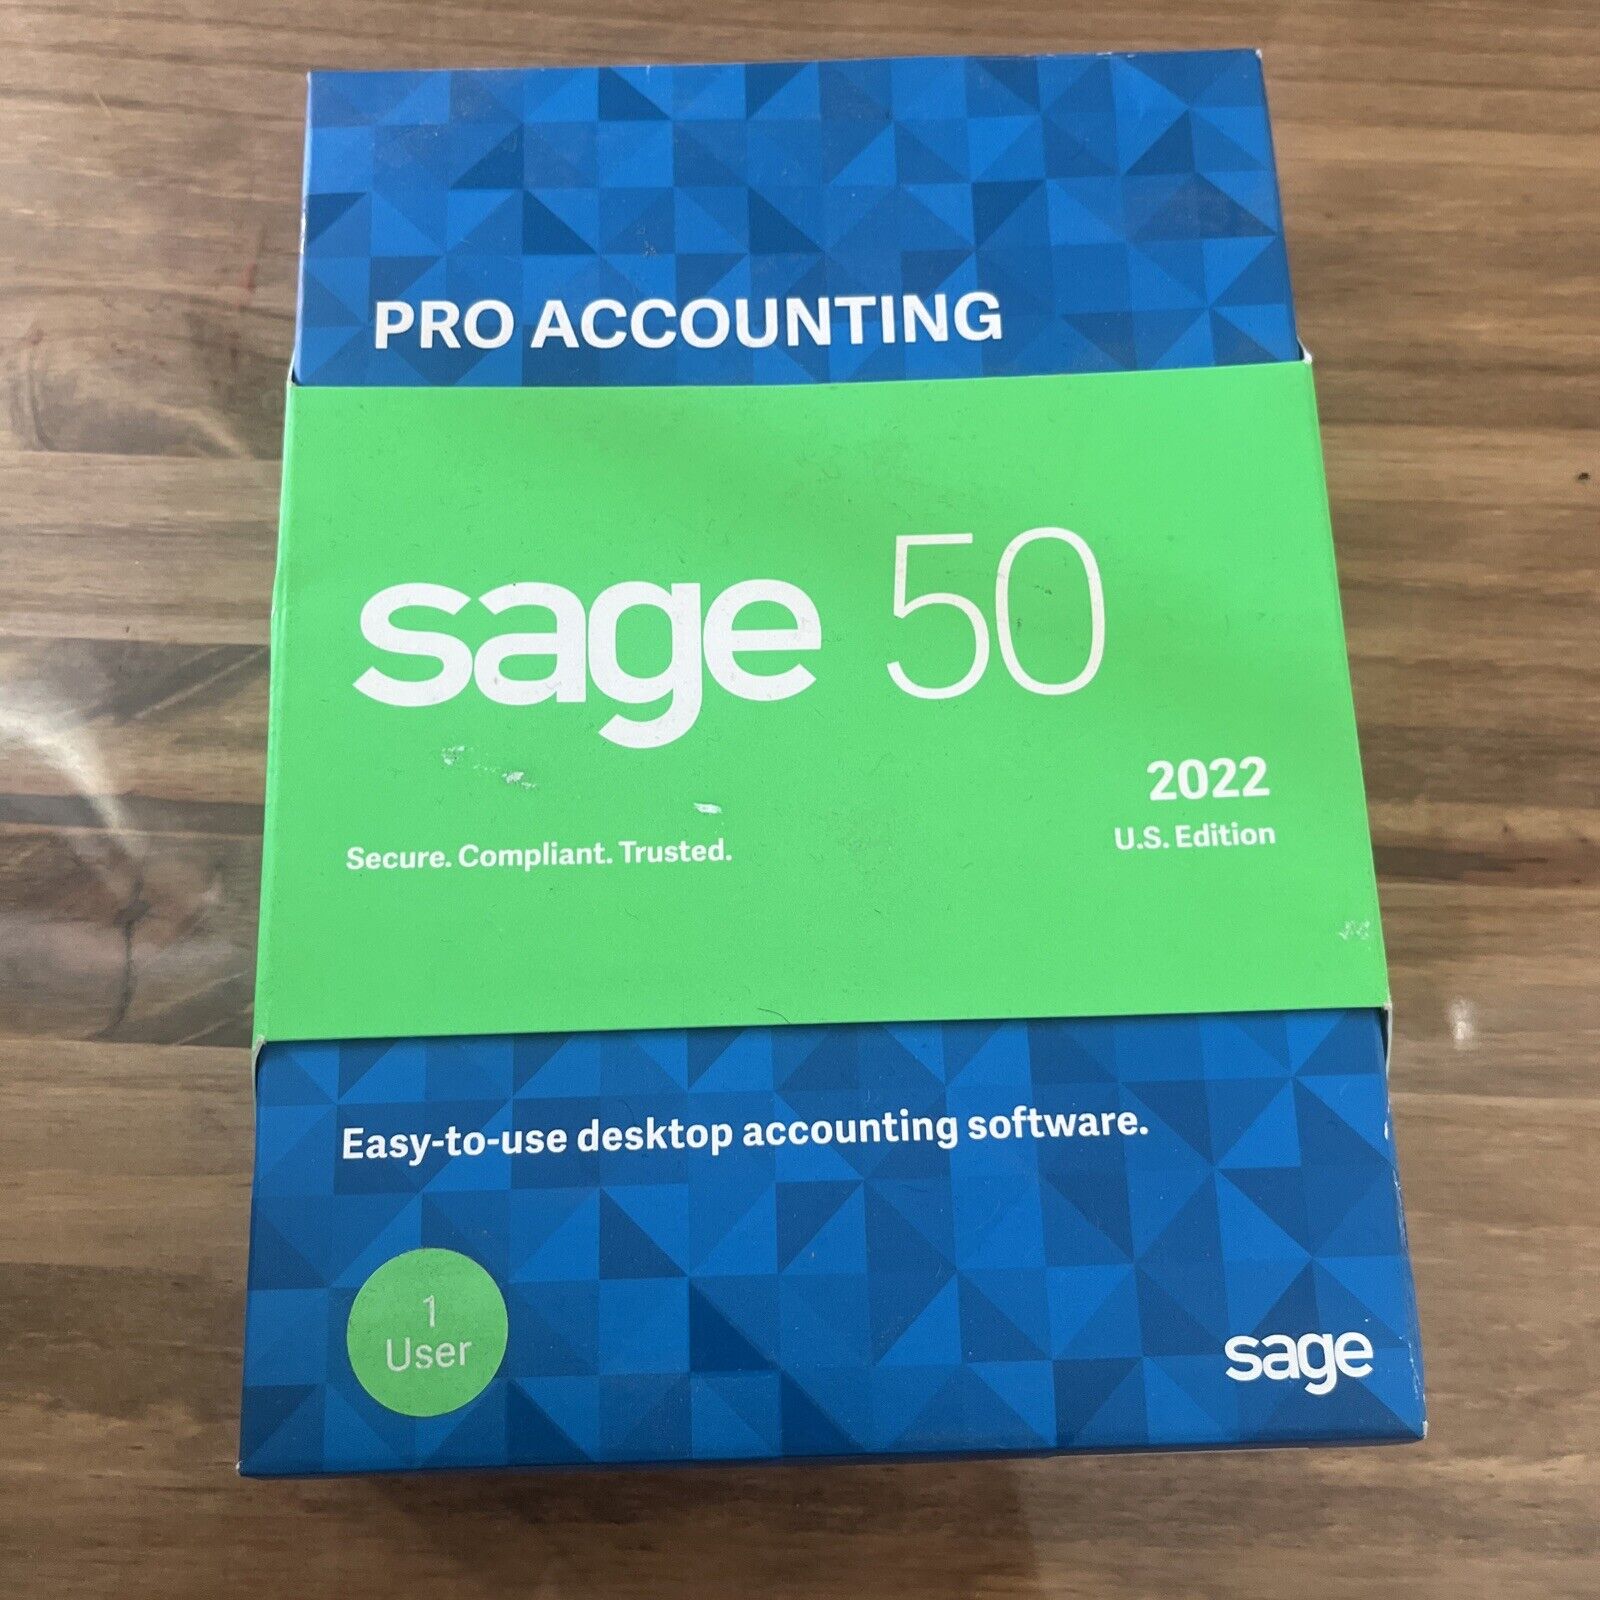 SAGE 50 Pro Accounting 2022 Software for Microsoft Windows 10/8.1 - 1 User